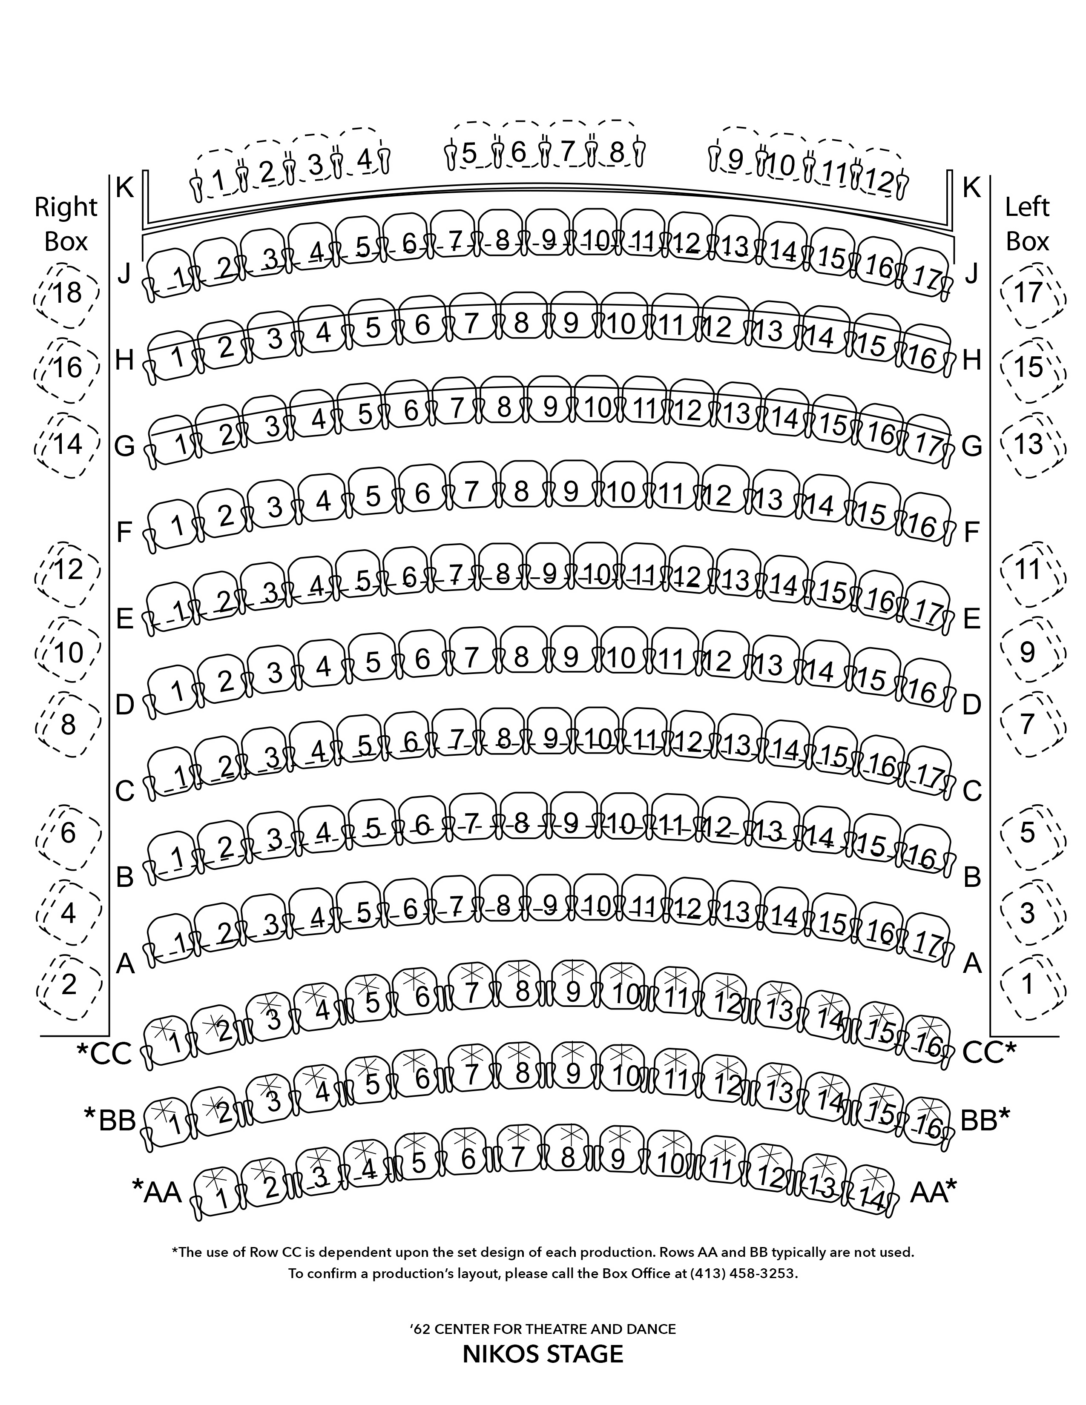 Williamstown Theater Festival Seating Chart